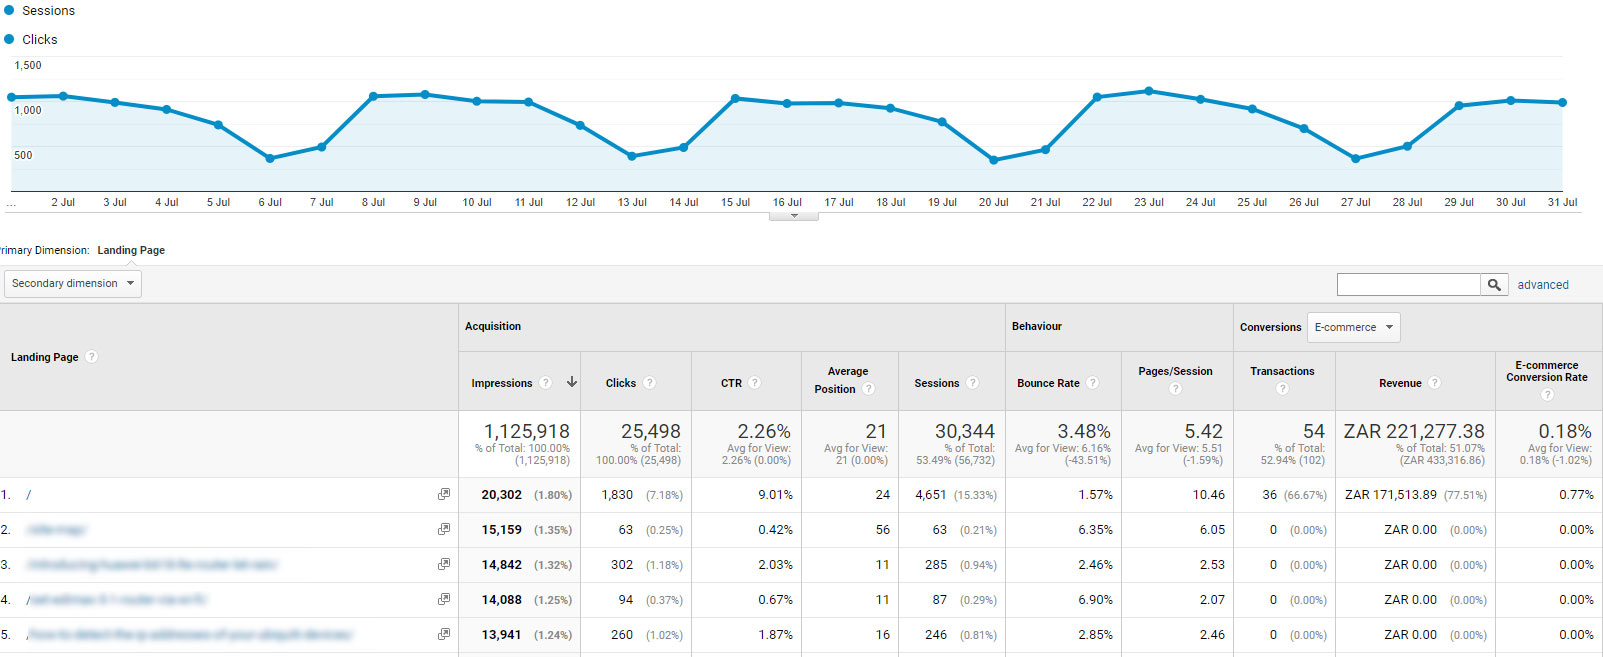 click-through-rate by landing page data view on Google Analytics